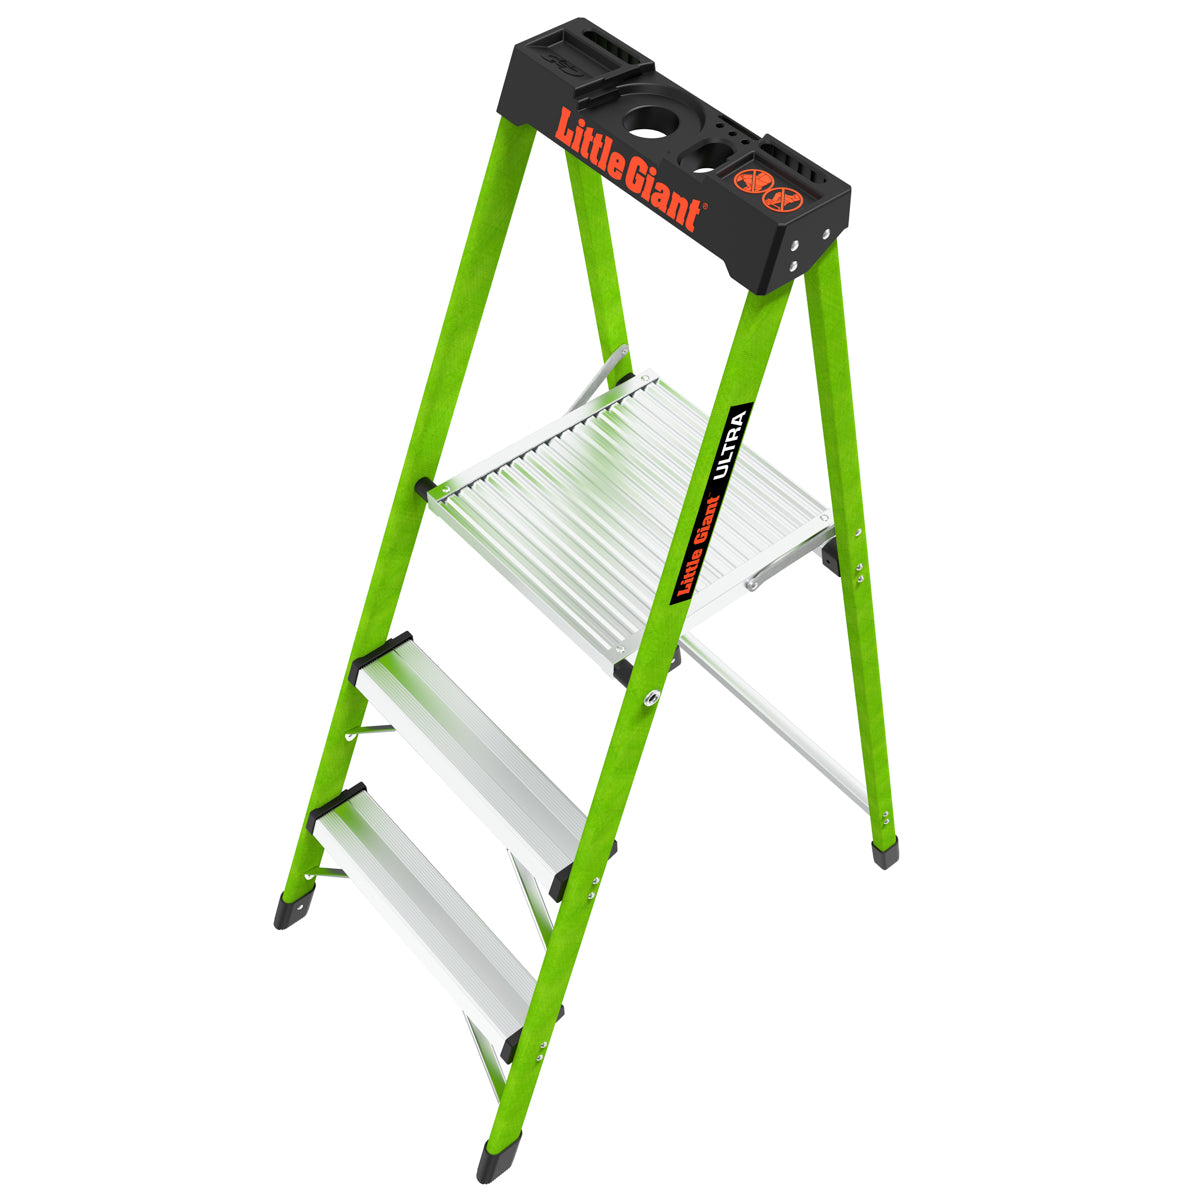 Ultra – Little Giant Ladder Systems